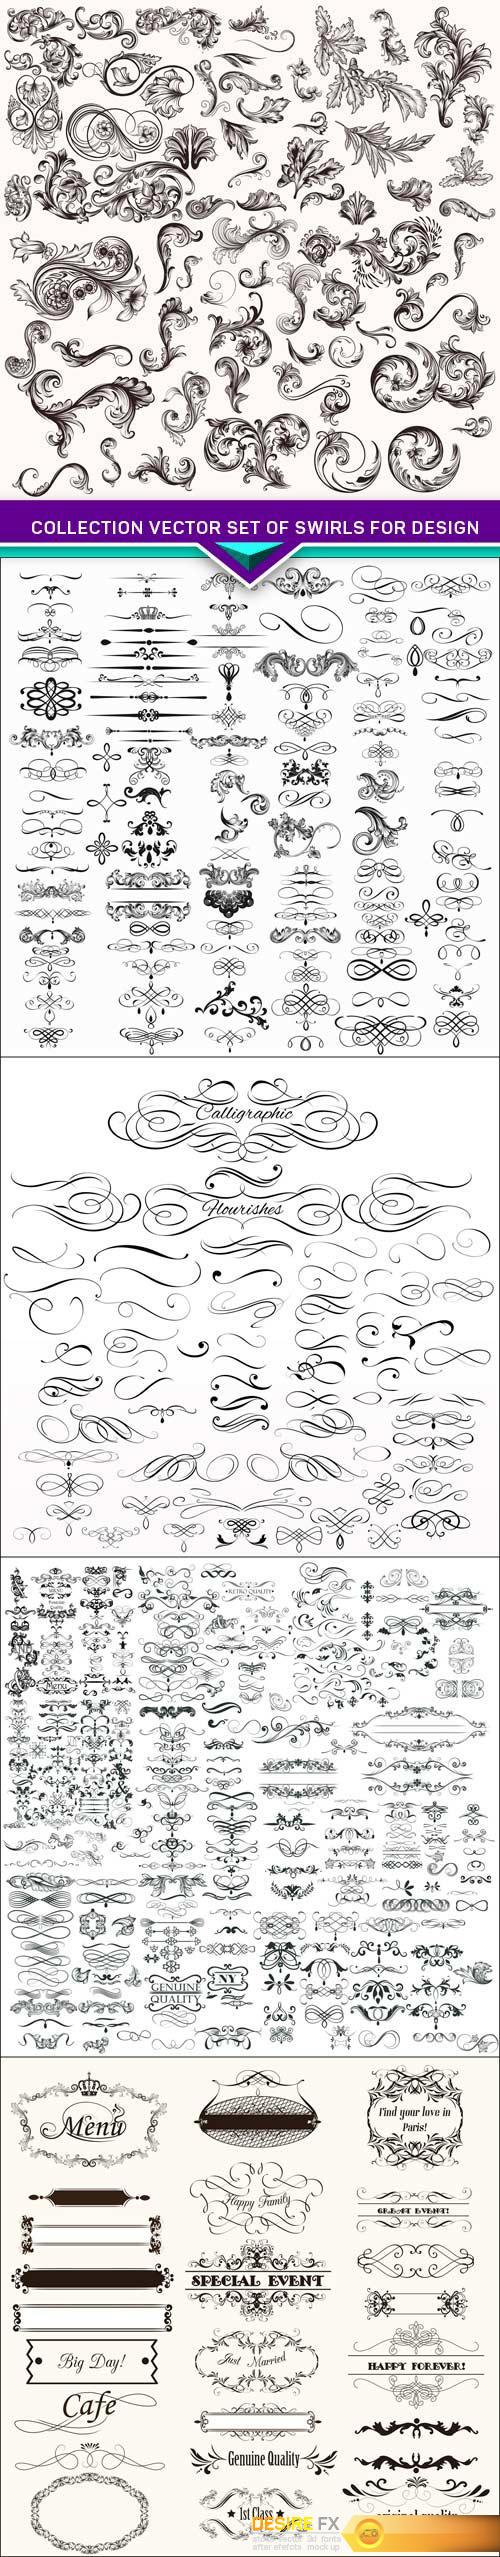 Collection vector set of swirls for design 5X EPS